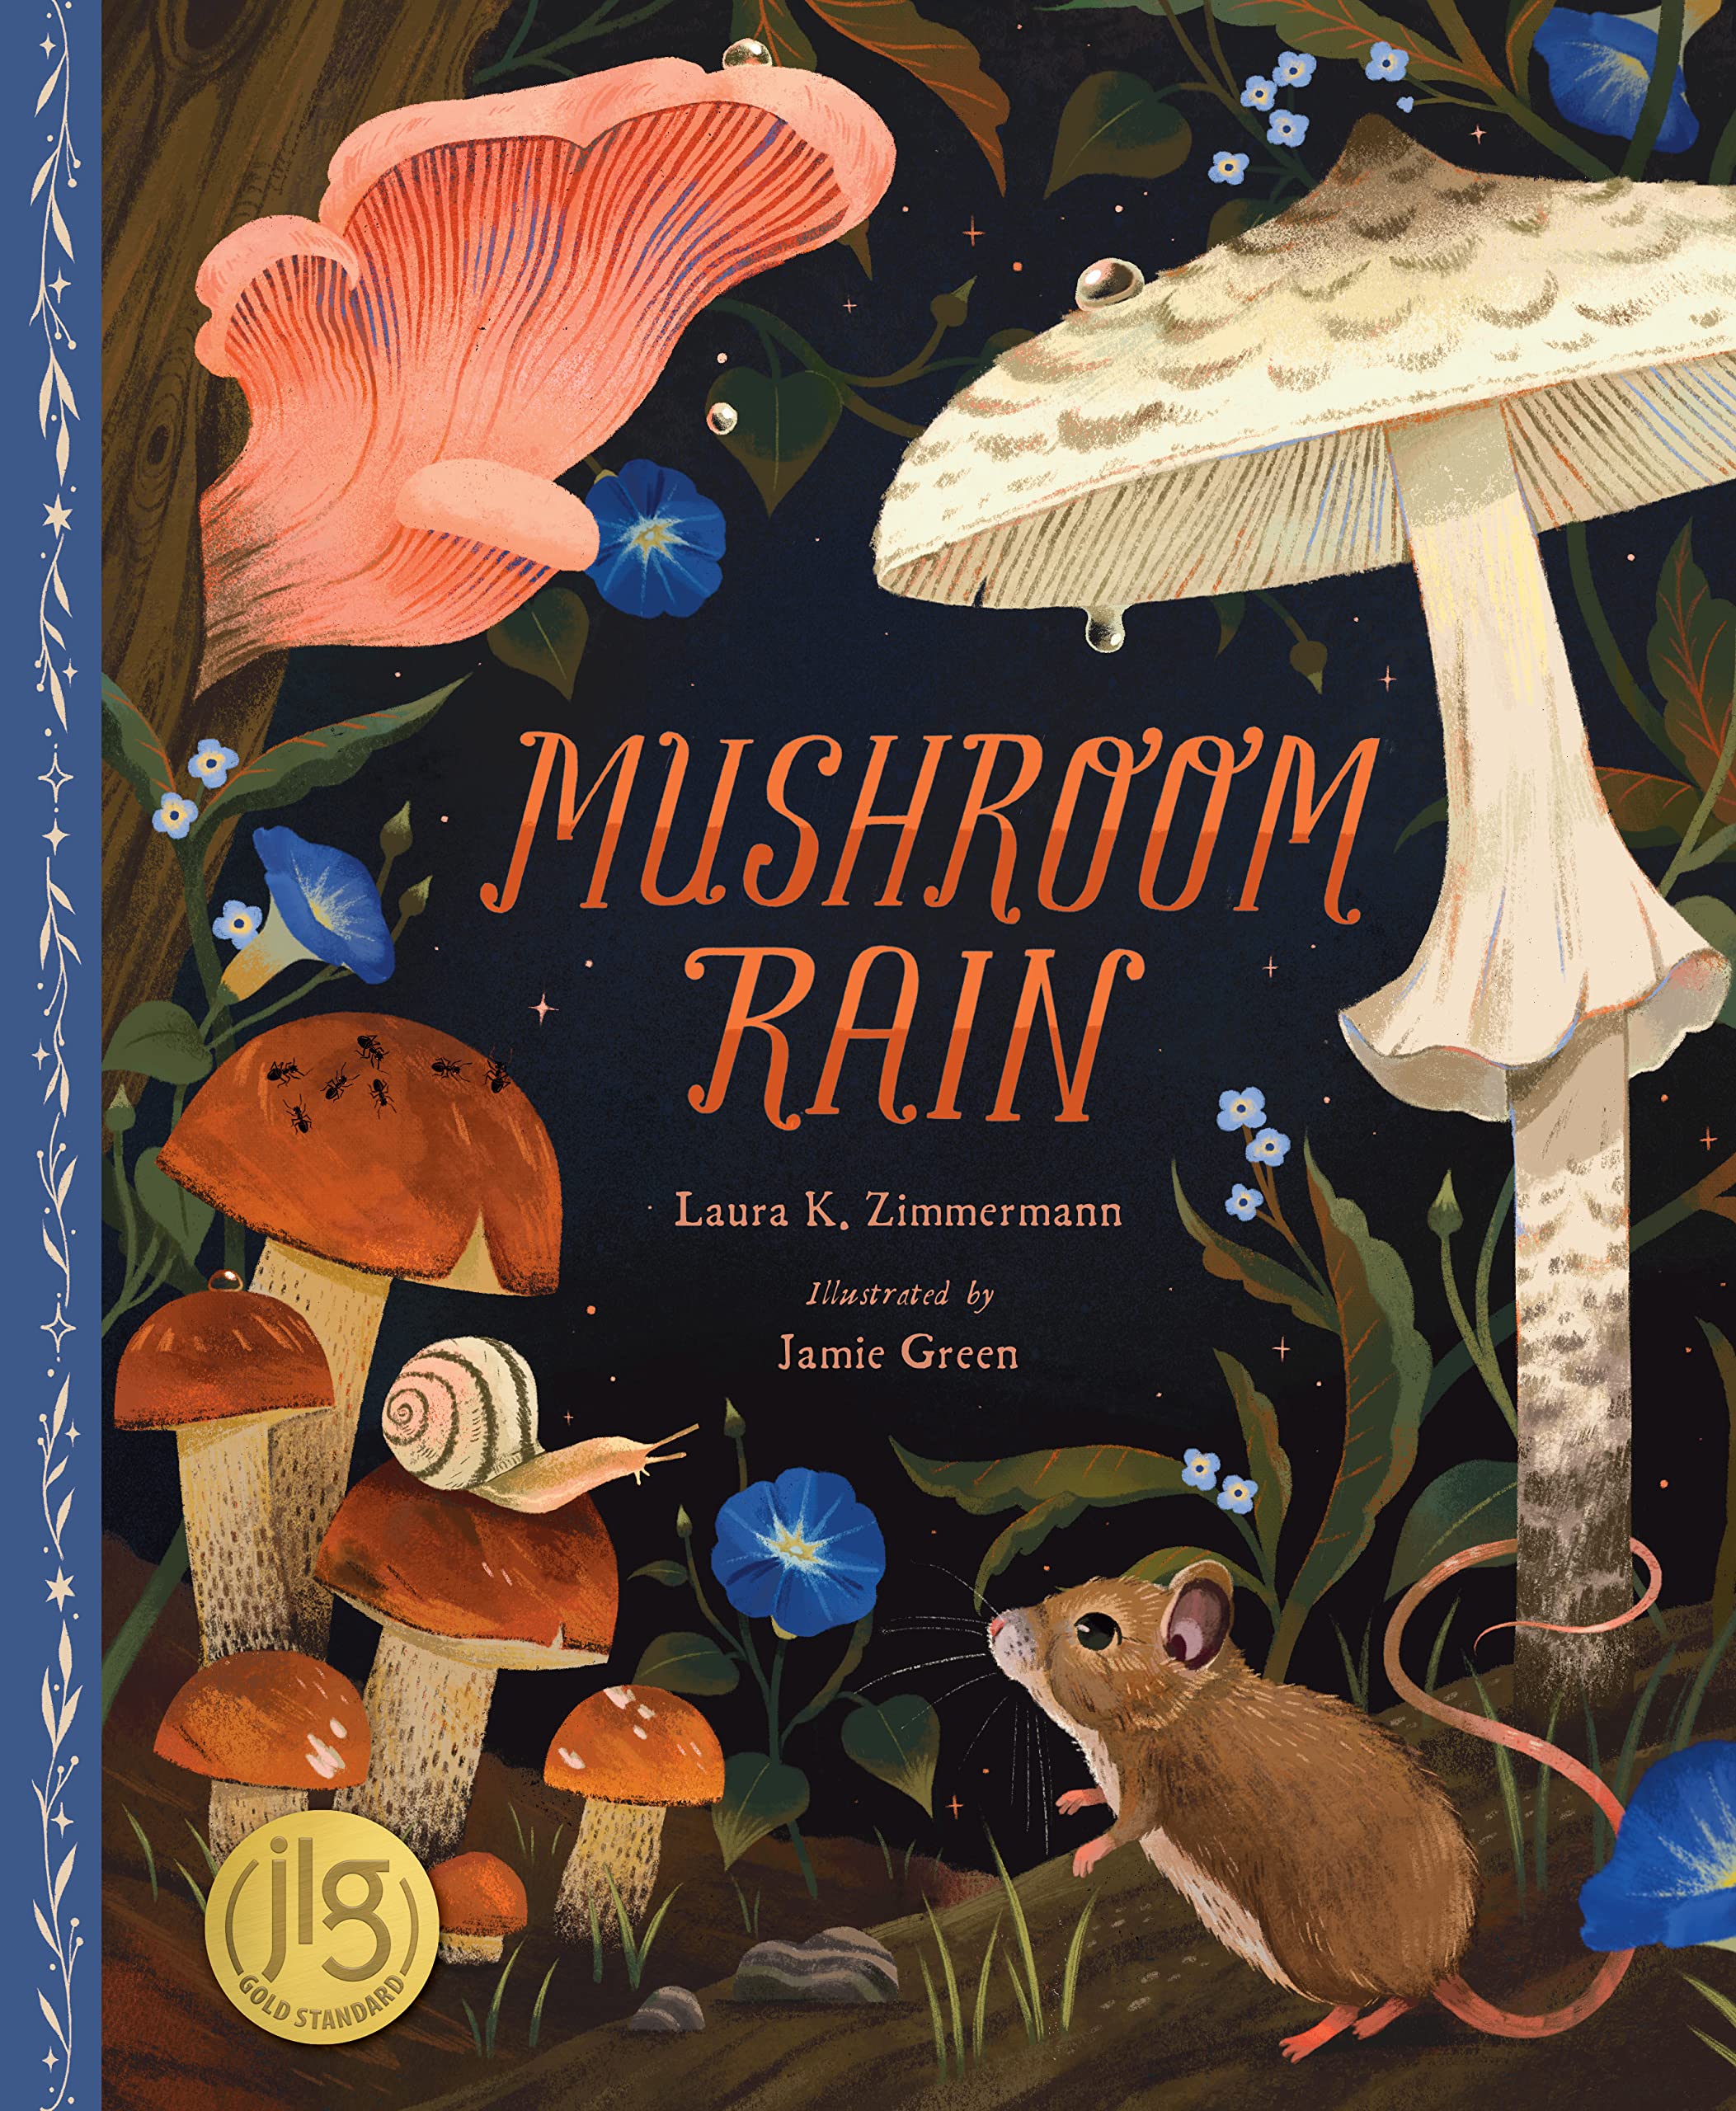 title and illustrations of mushrooms